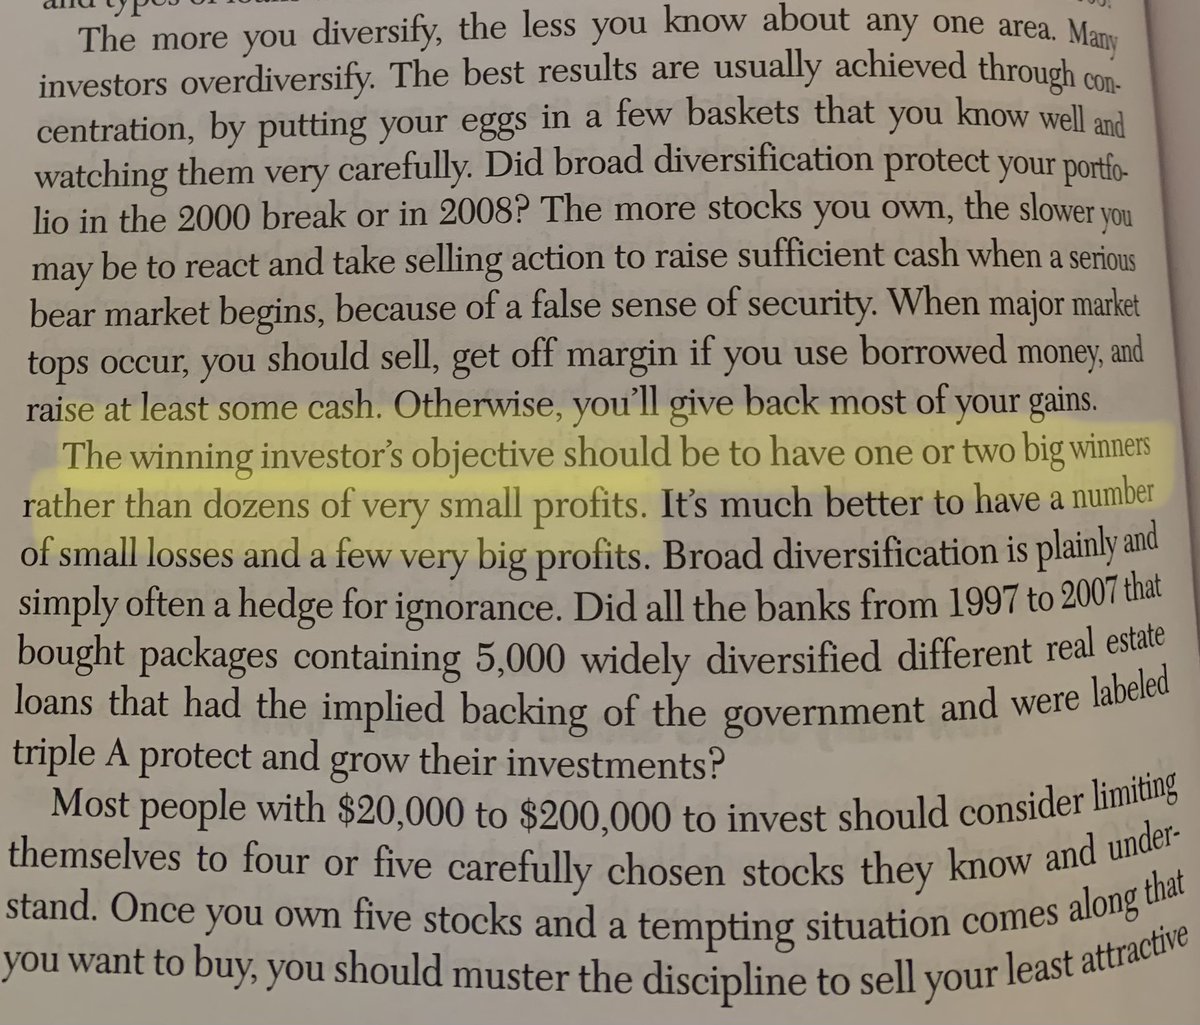 “The winning investors objective should be to have one or two big winners rather than dozens of very small profits.” 

“Most people with $20,000 to $200,000 to invest should consider limiting themselves to four or five carefully chosen stocks….”

HTMMIS William ONeil